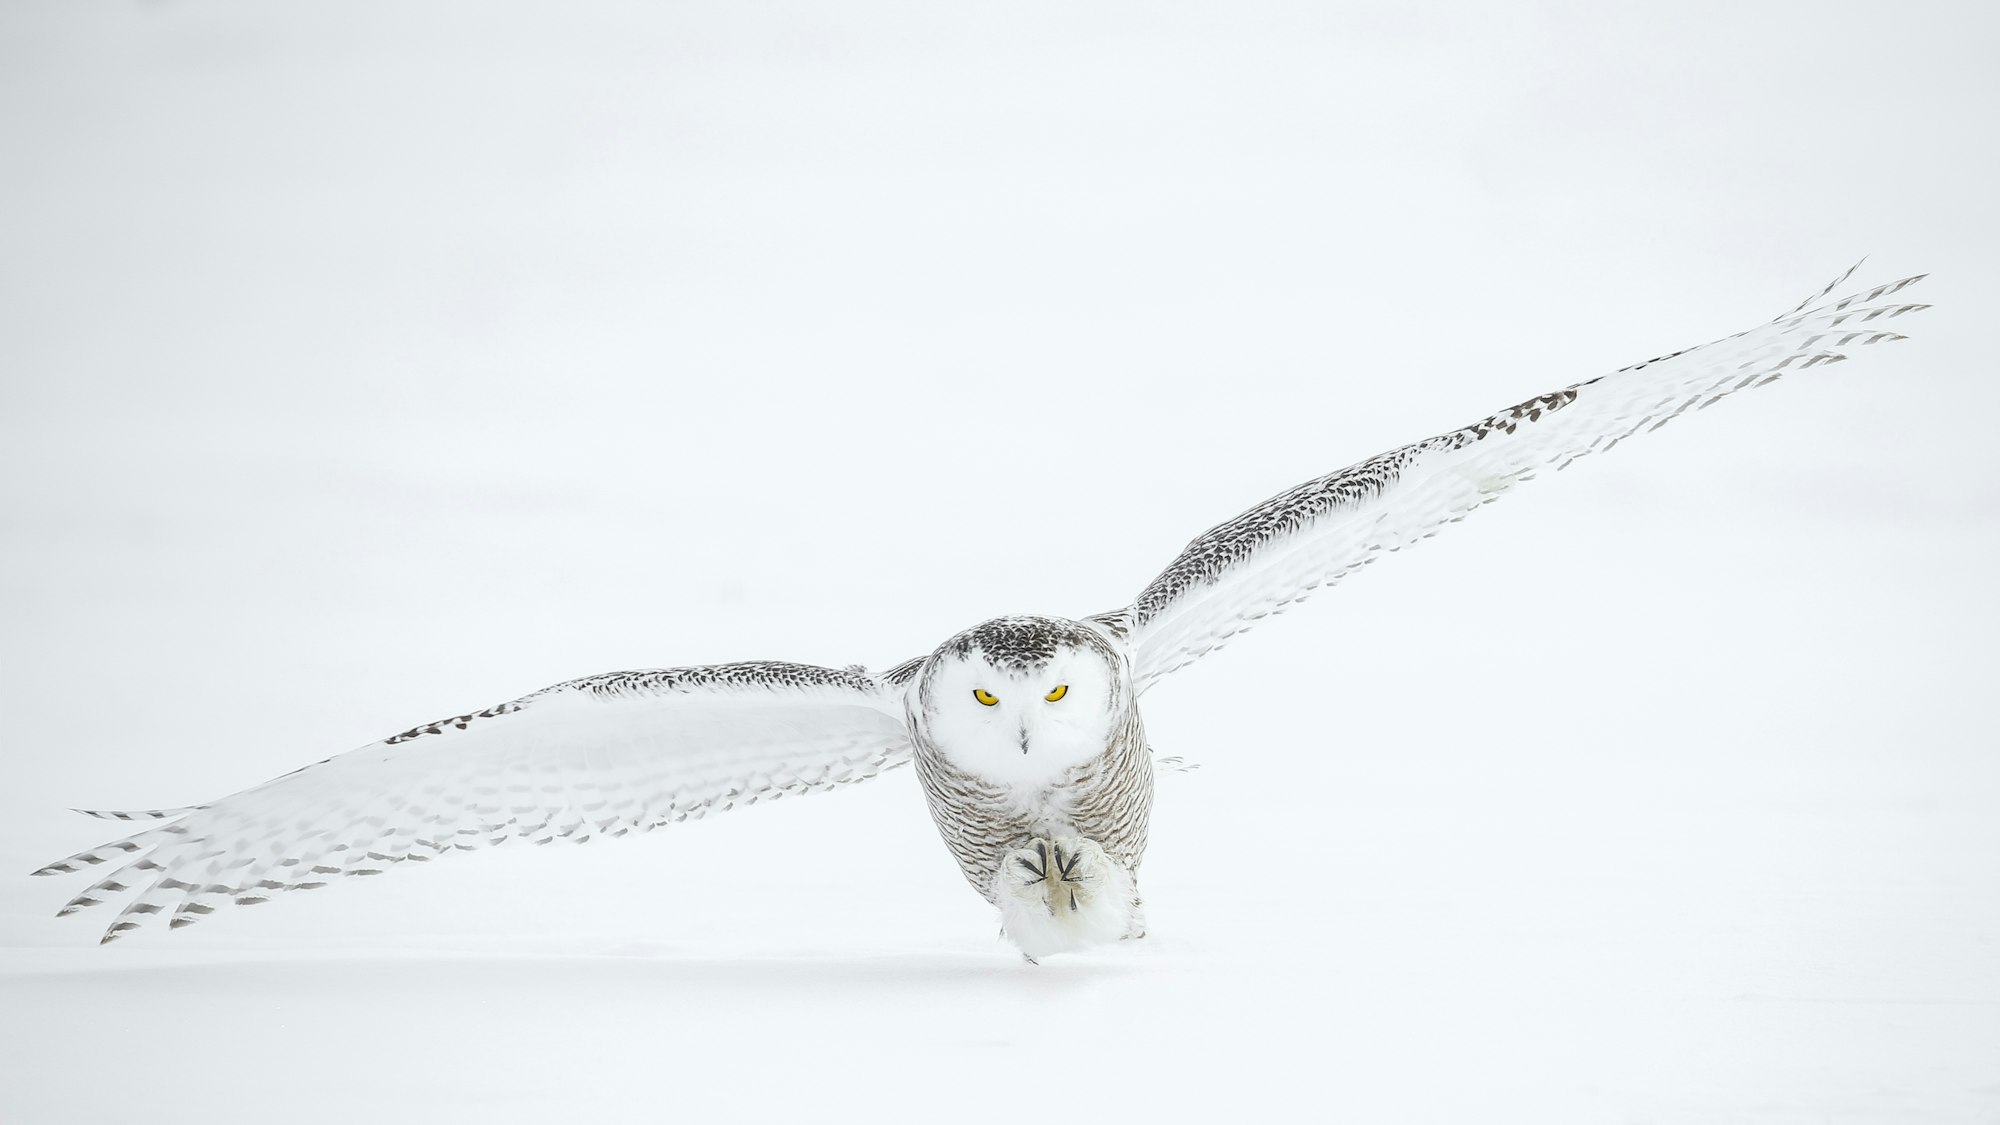 A snowy owl in the wintery landscape of Alberta, Canada photographed in -35 degree temperatures.